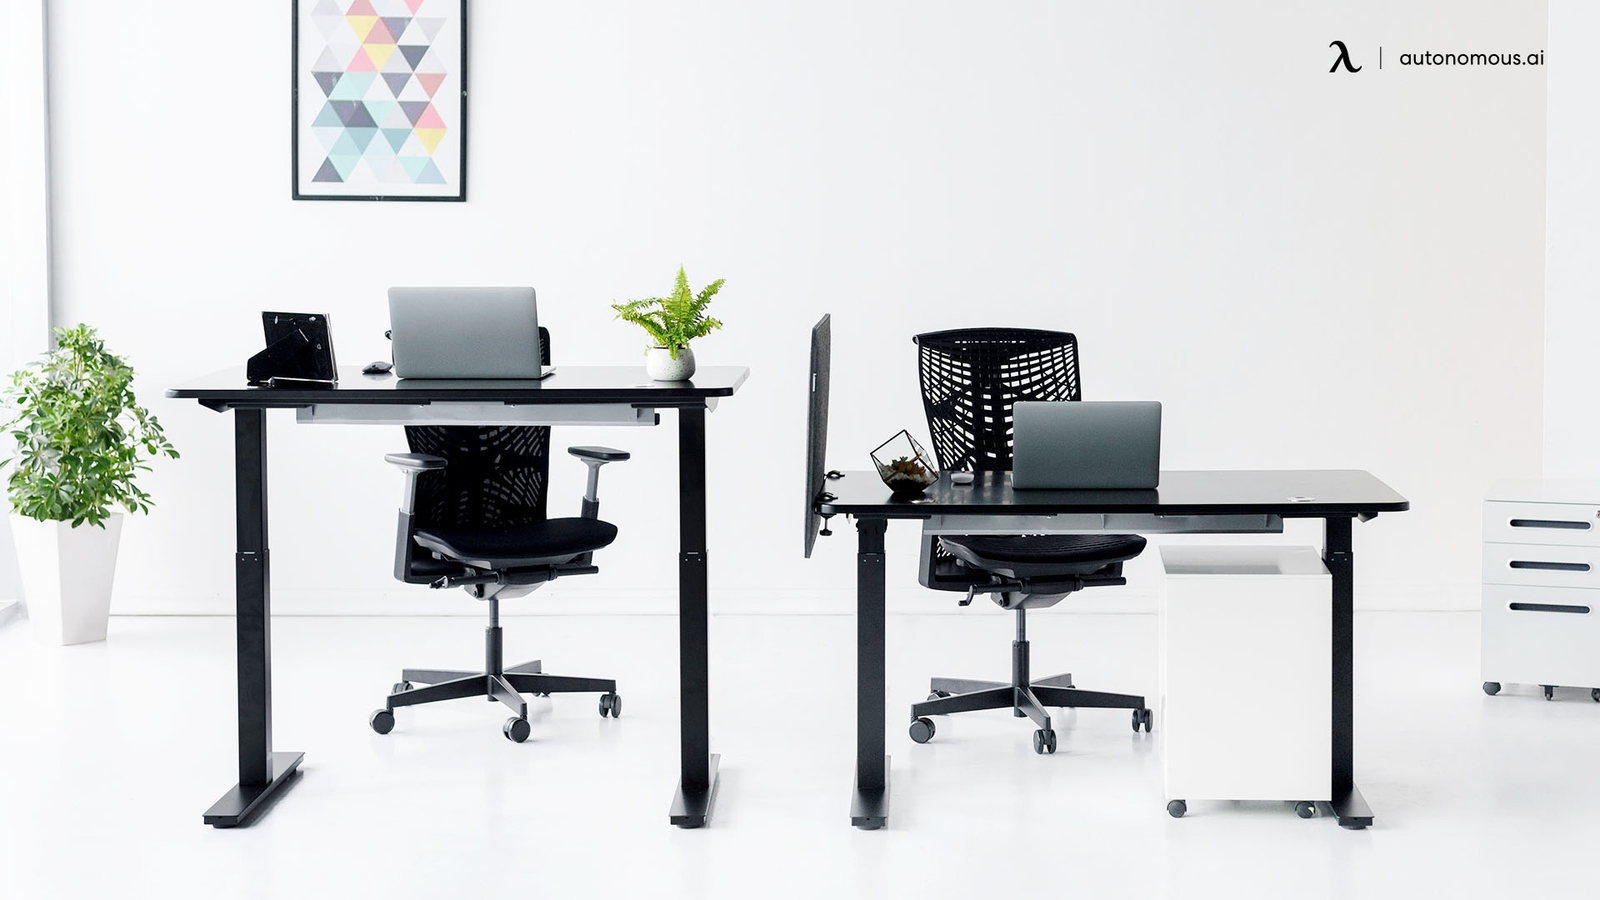 6 Office Equipment that Should Be in the Office to Support Productivity